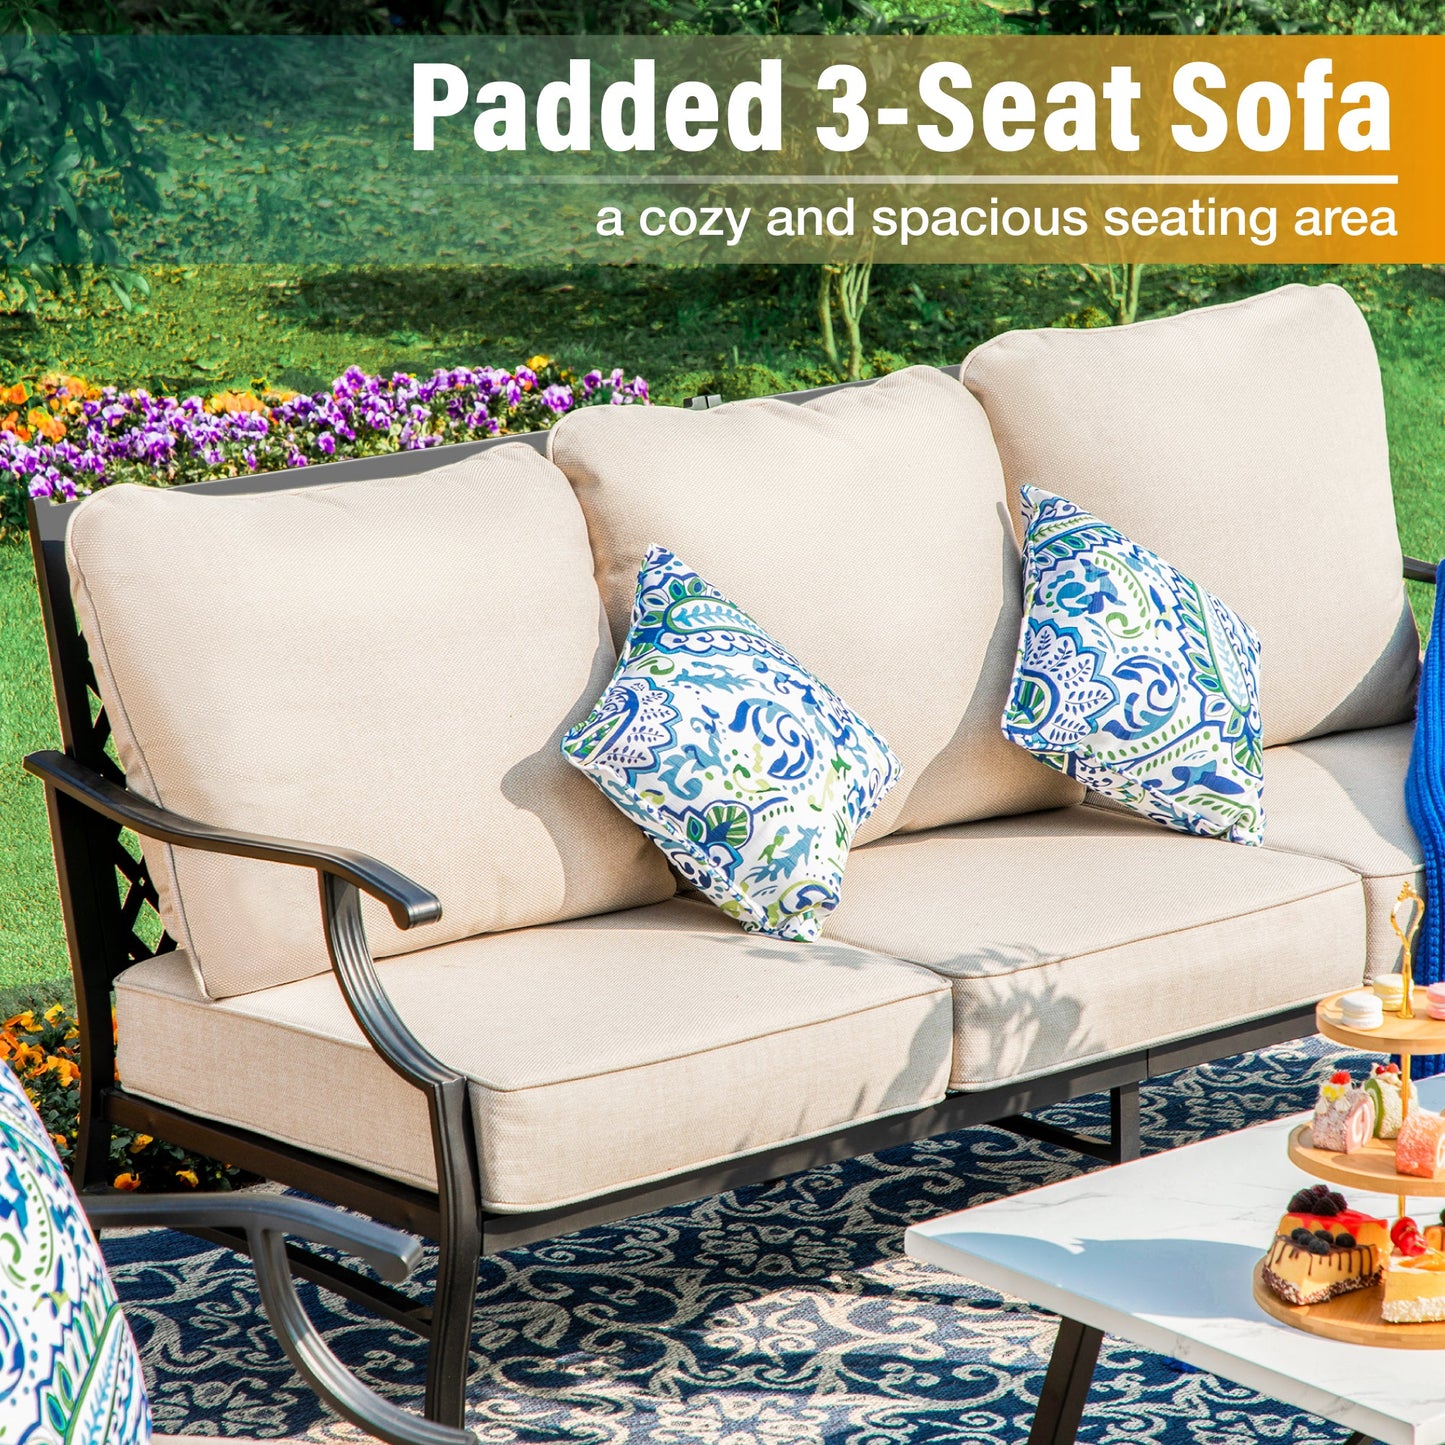 Sophia&William 6 Piece Patio Conversation Set Outdoor Table and Rocking Chairs Furniture Set with Ottomans